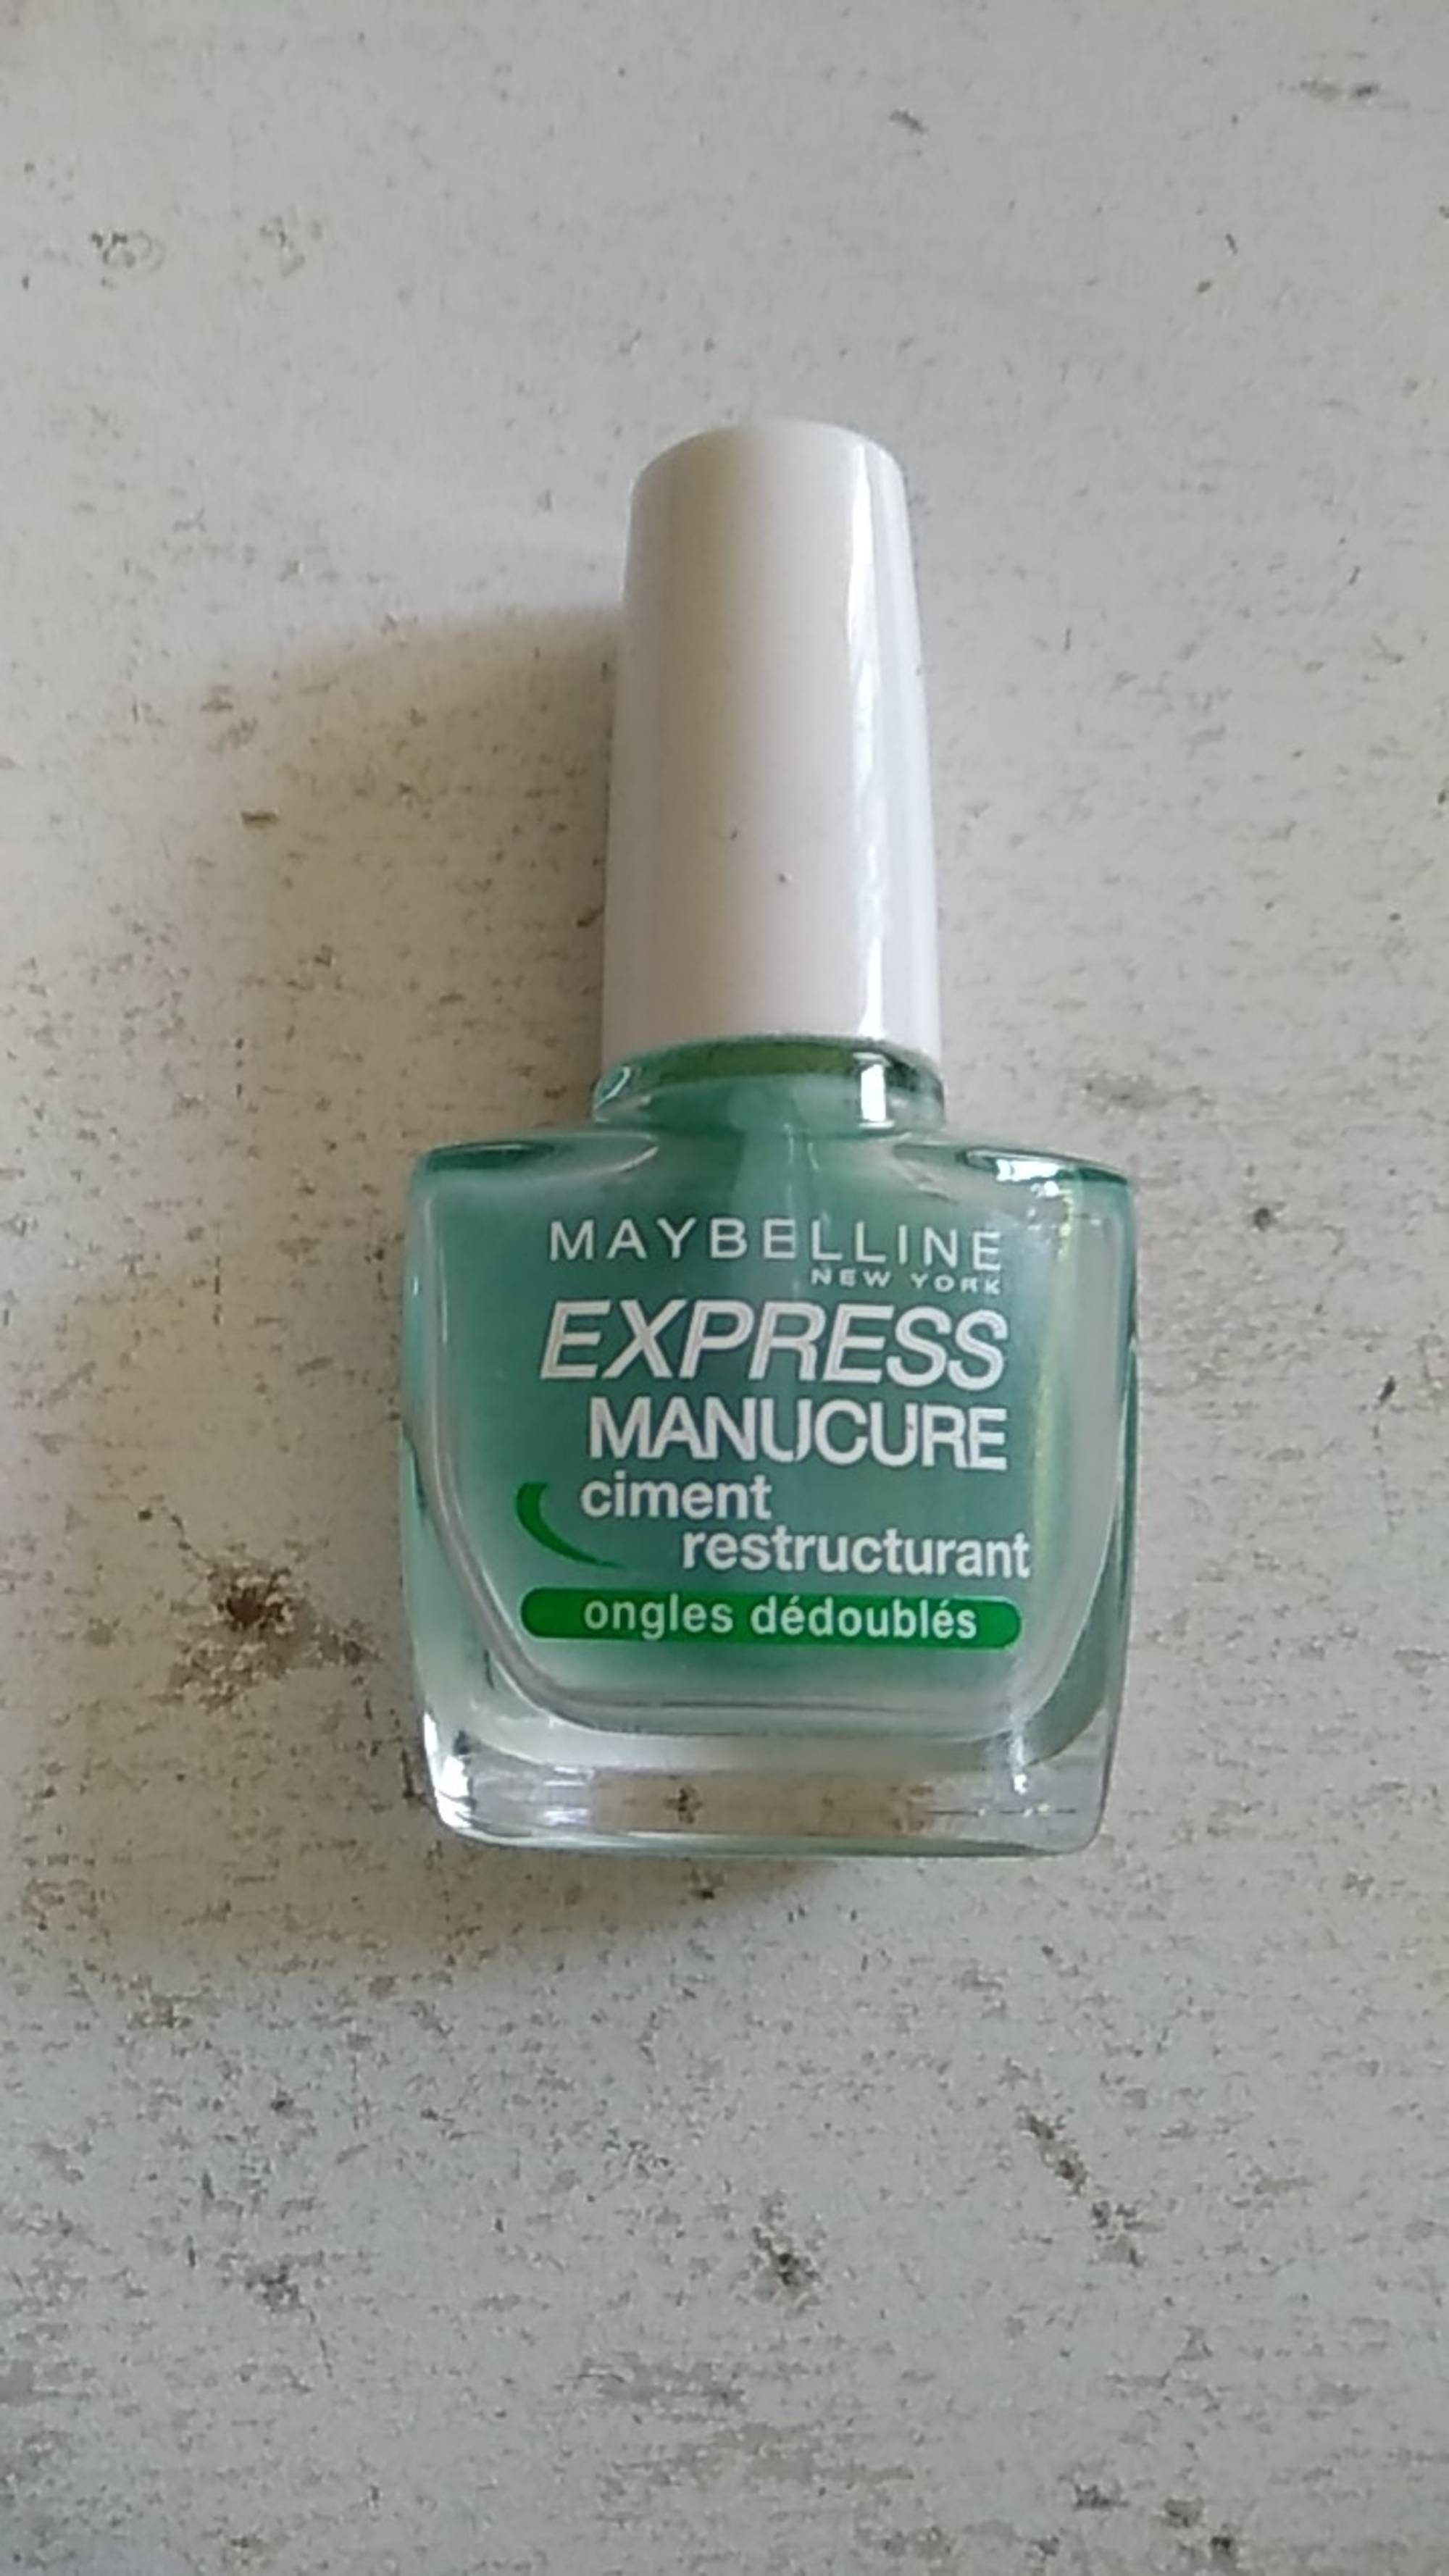 MAYBELLINE NEW YORK - Express manucure ciment restructurant